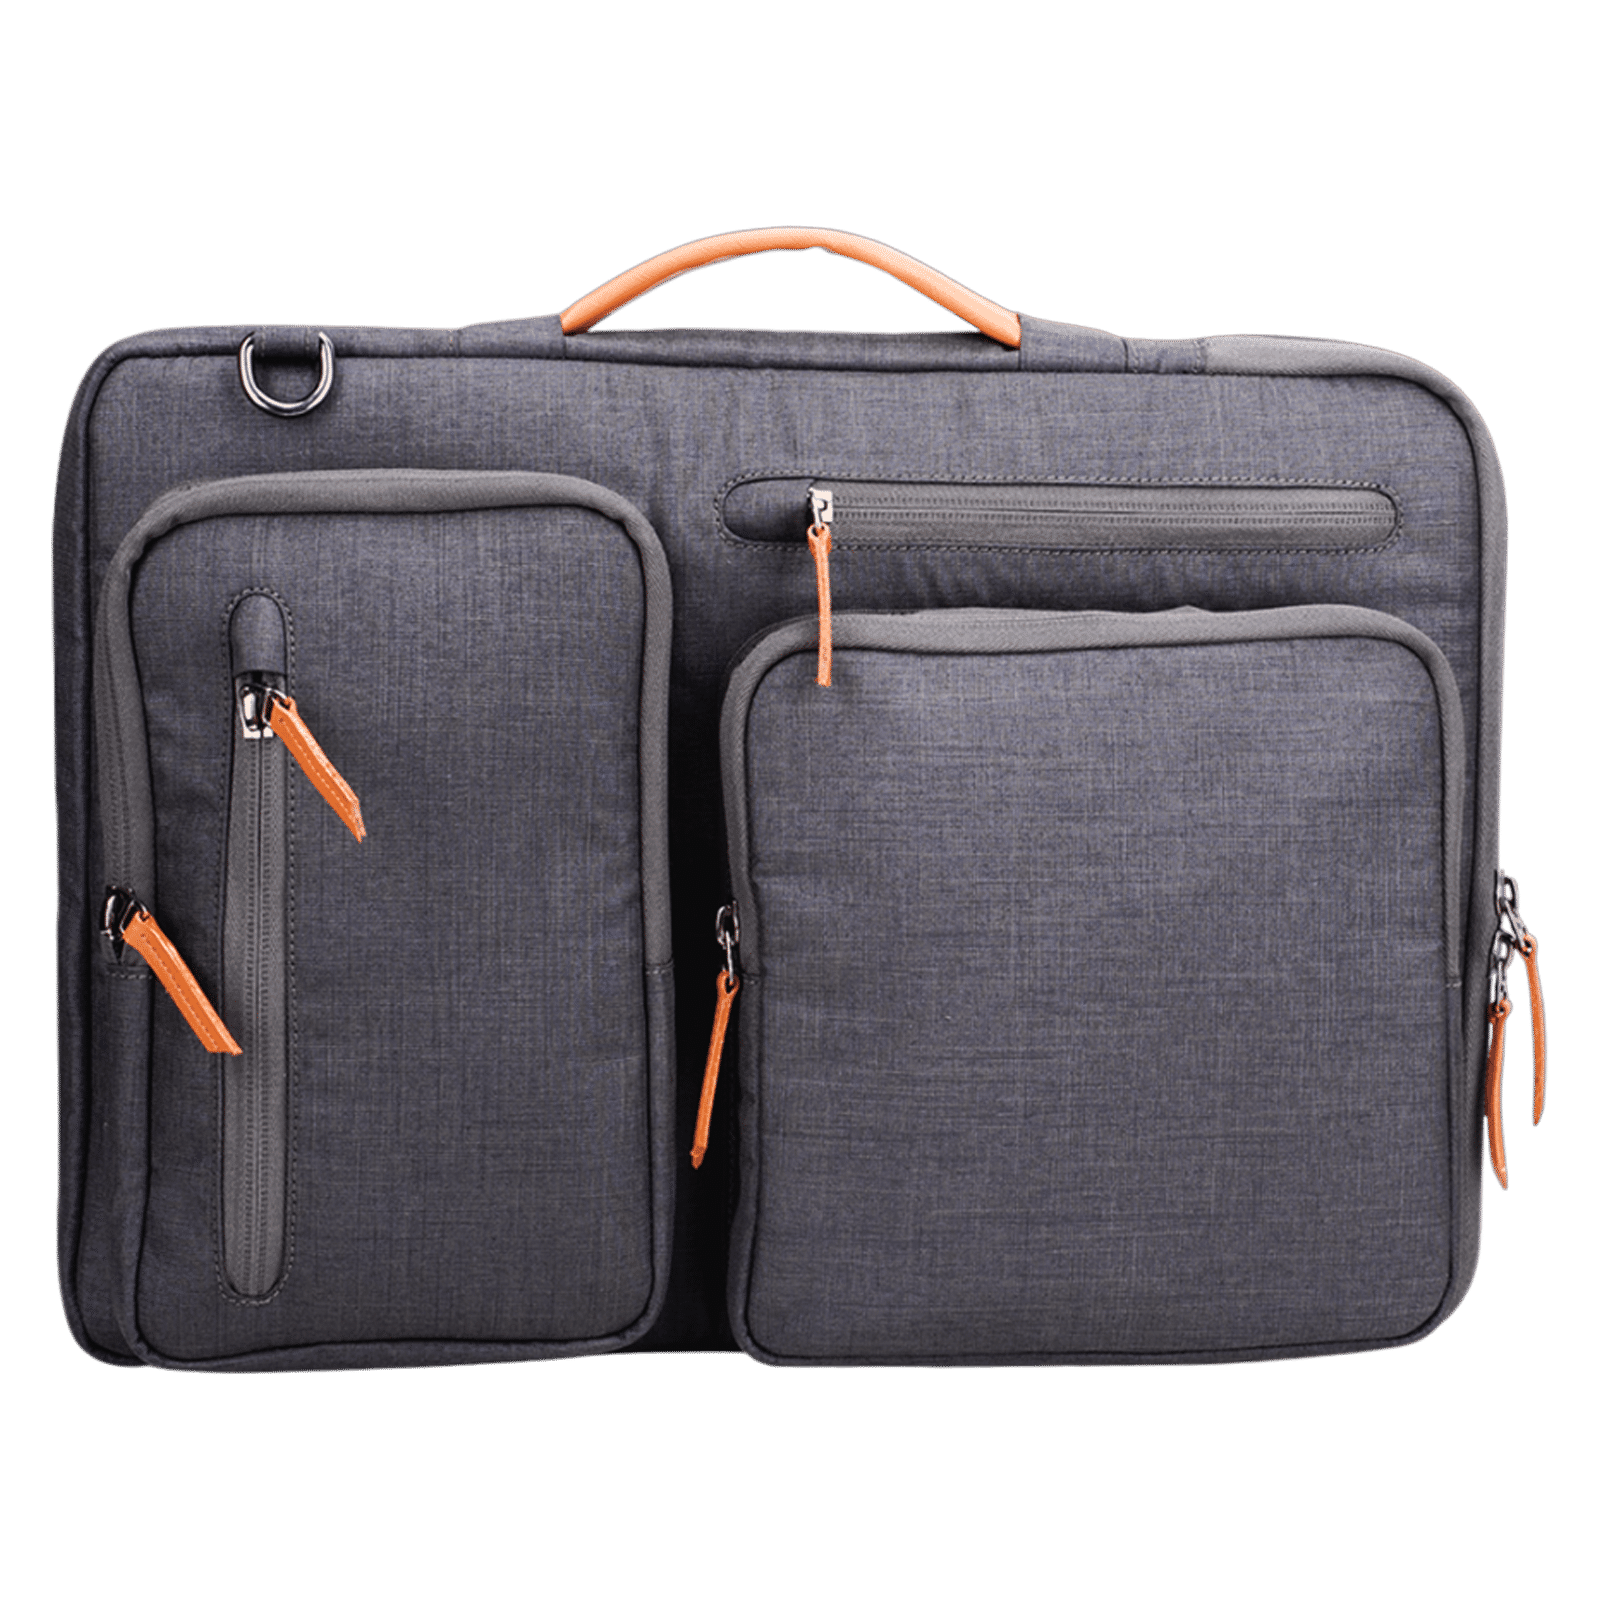 Omega Strolly (croma Tex) Hard Luggage Bags at Best Price in Mumbai | Vip  Industries Ltd.